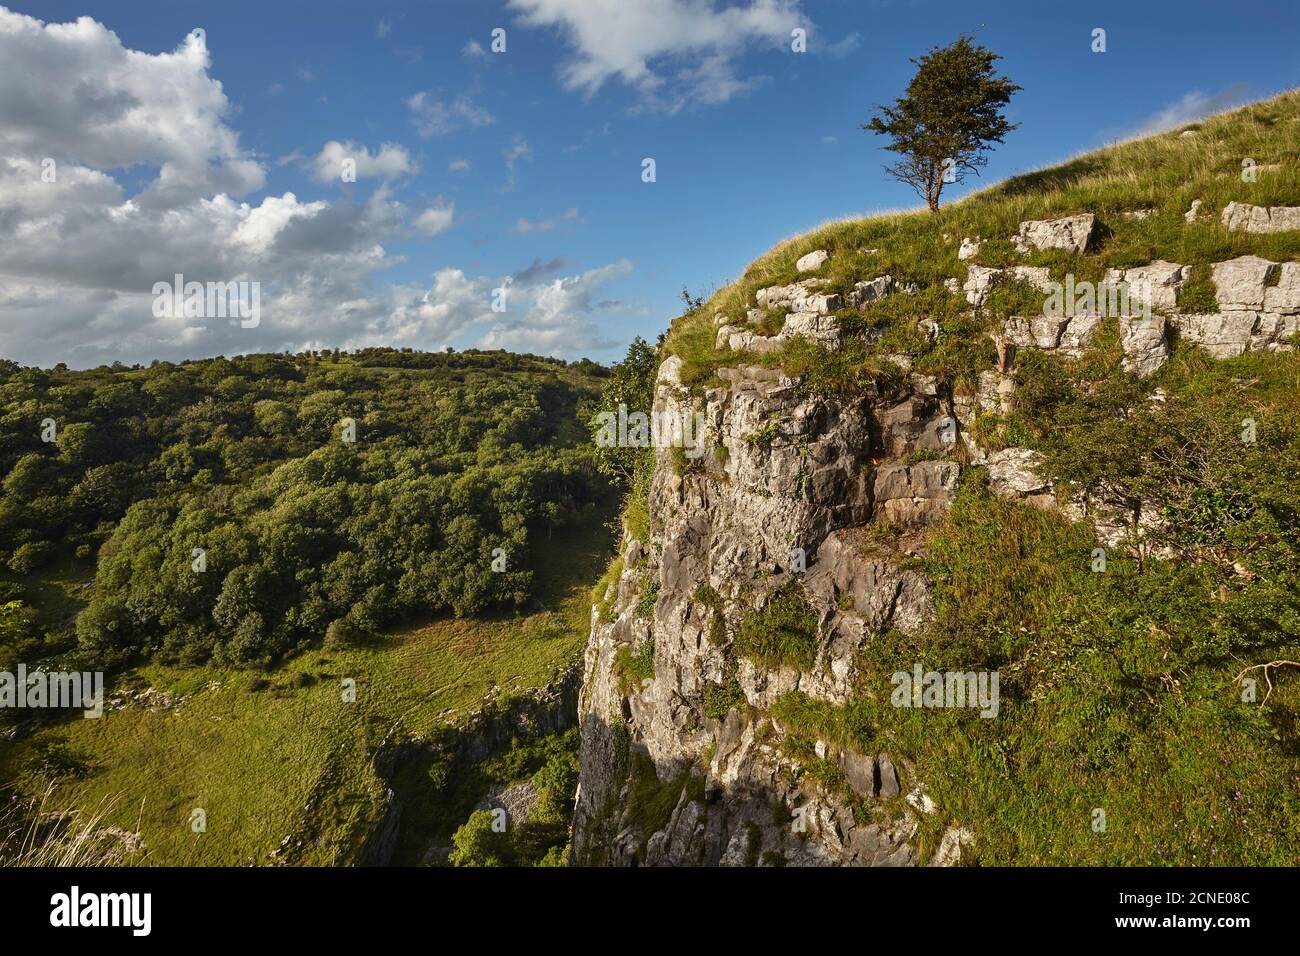 The limestone cliffs of Cheddar Gorge, in the Mendip Hills, near Cheddar, Somerset, England, United Kingdom, Europe Stock Photo